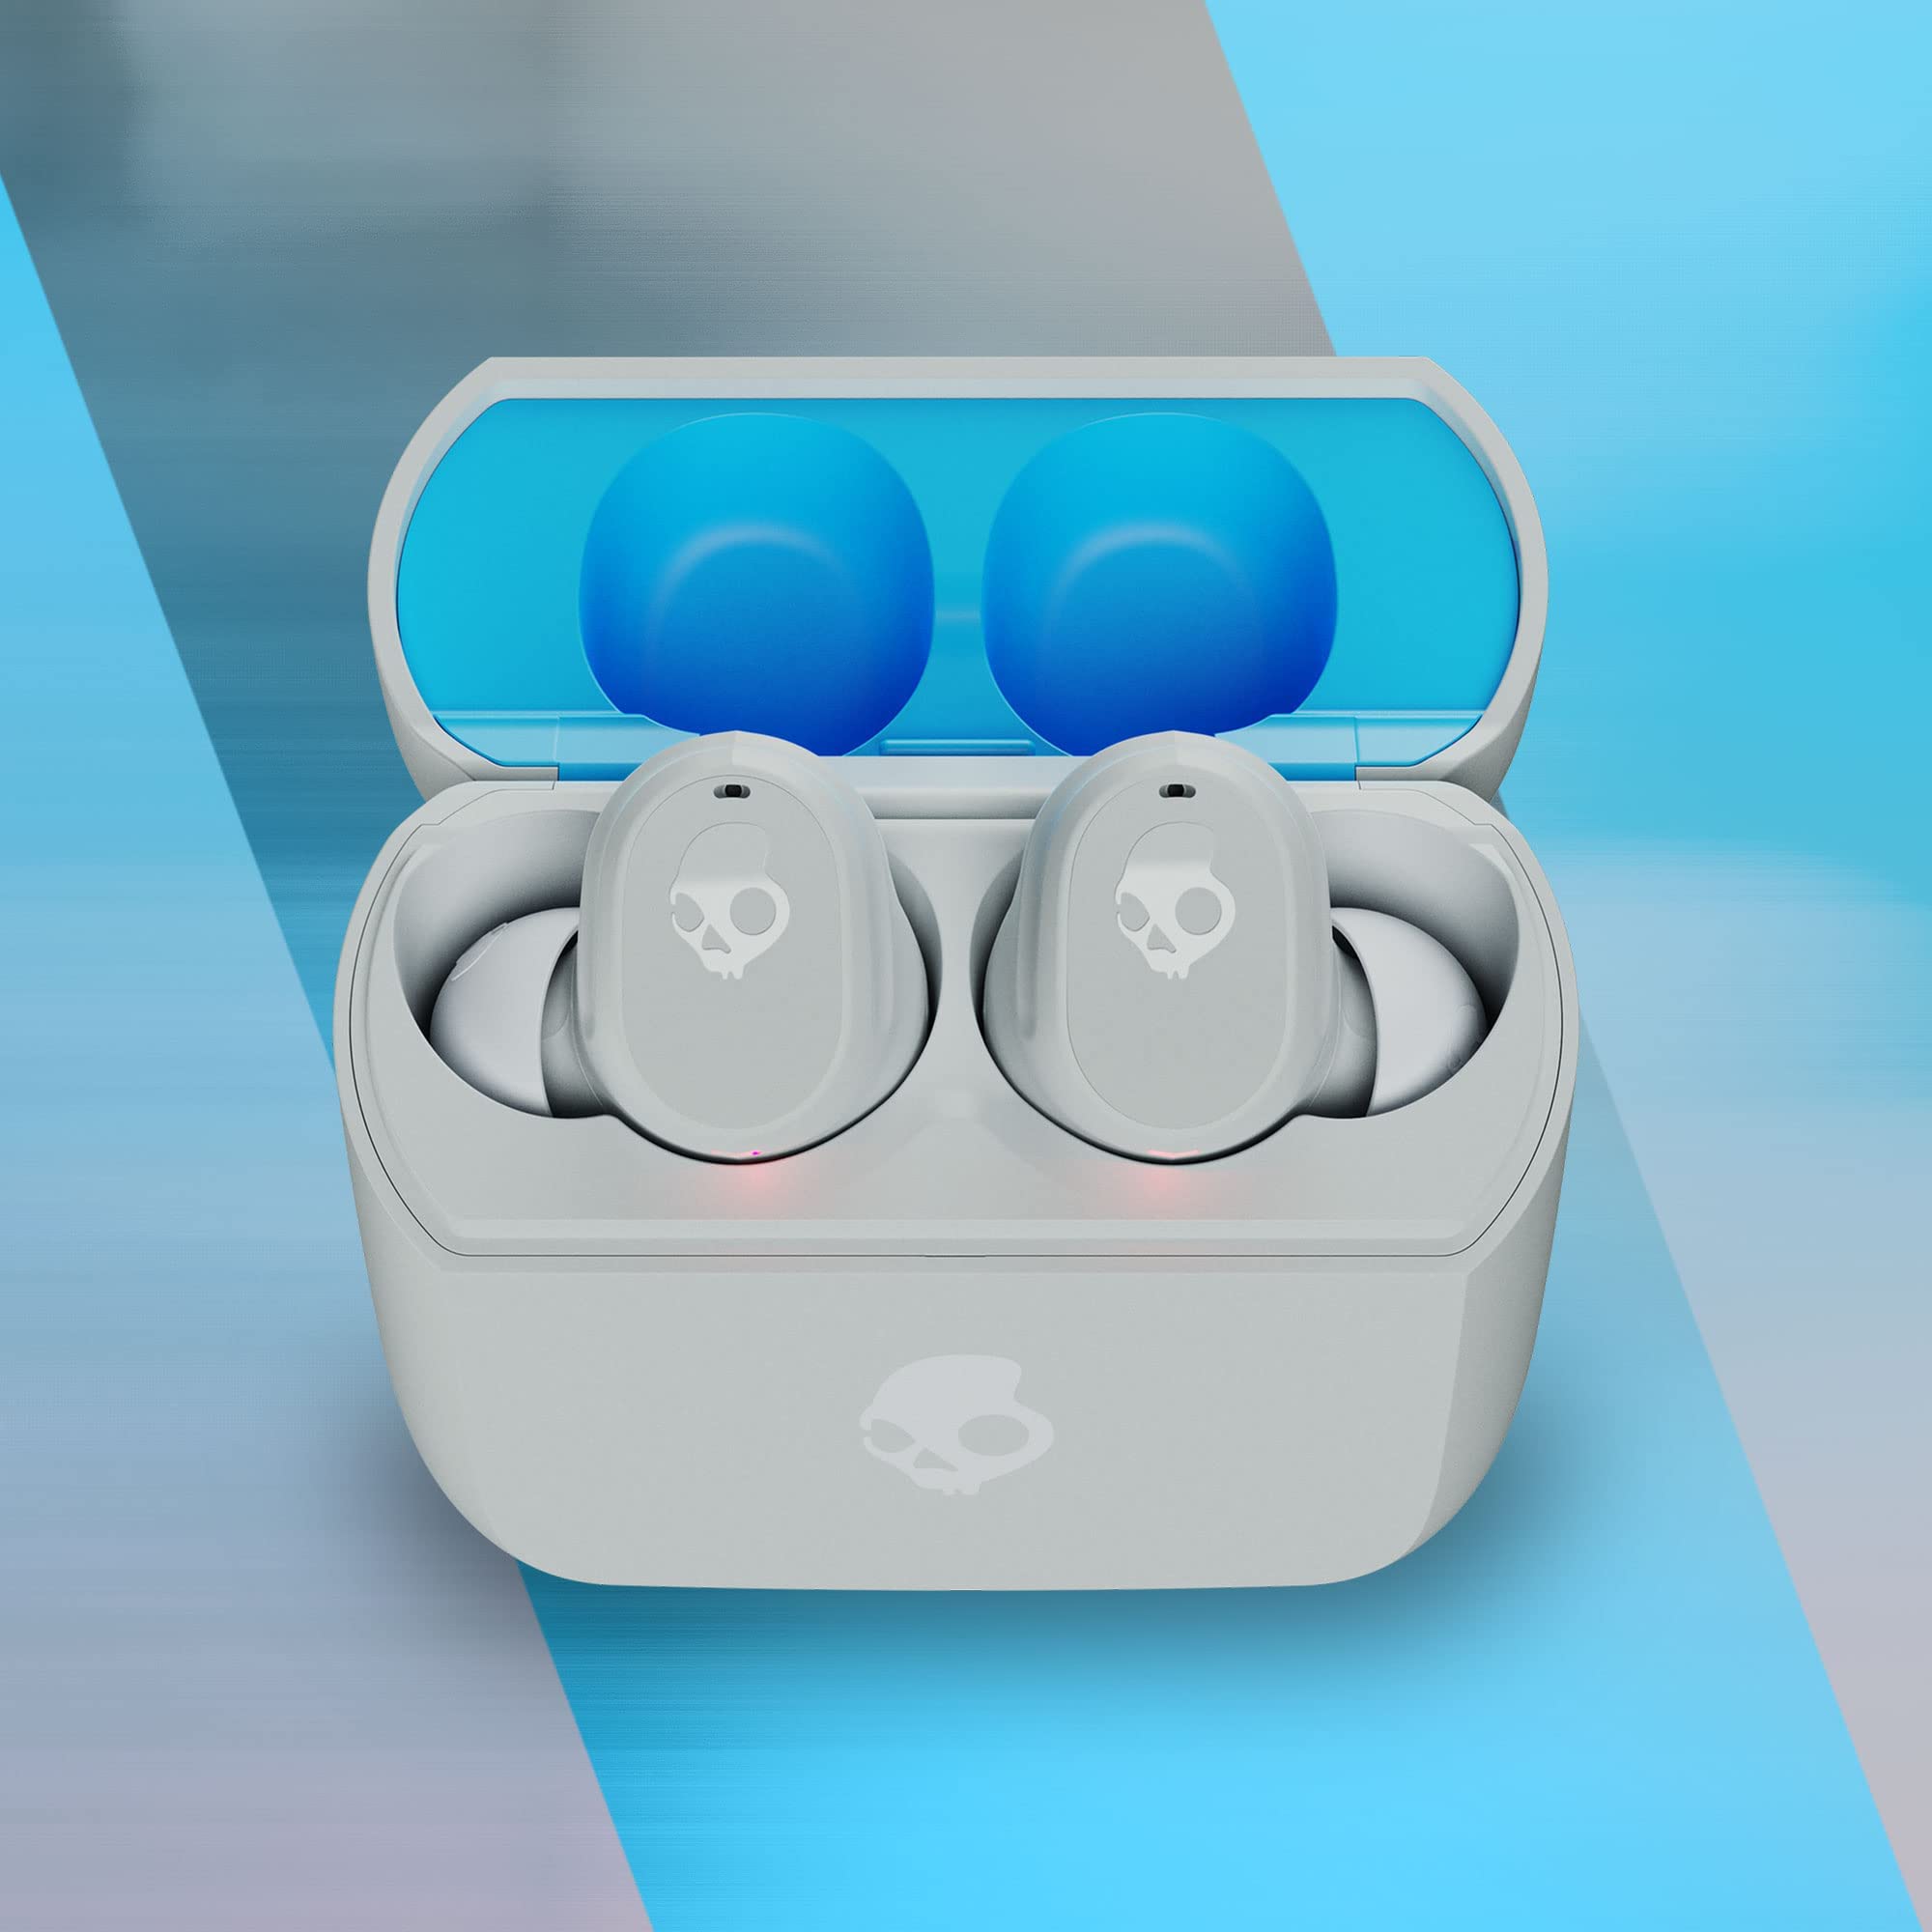 Skullcandy Mod In-Ear Wireless Earbuds, Multipoint Pairing, 34 Hr Battery, Microphone, Works with iPhone Android and Bluetooth Devices - Grey/Blue